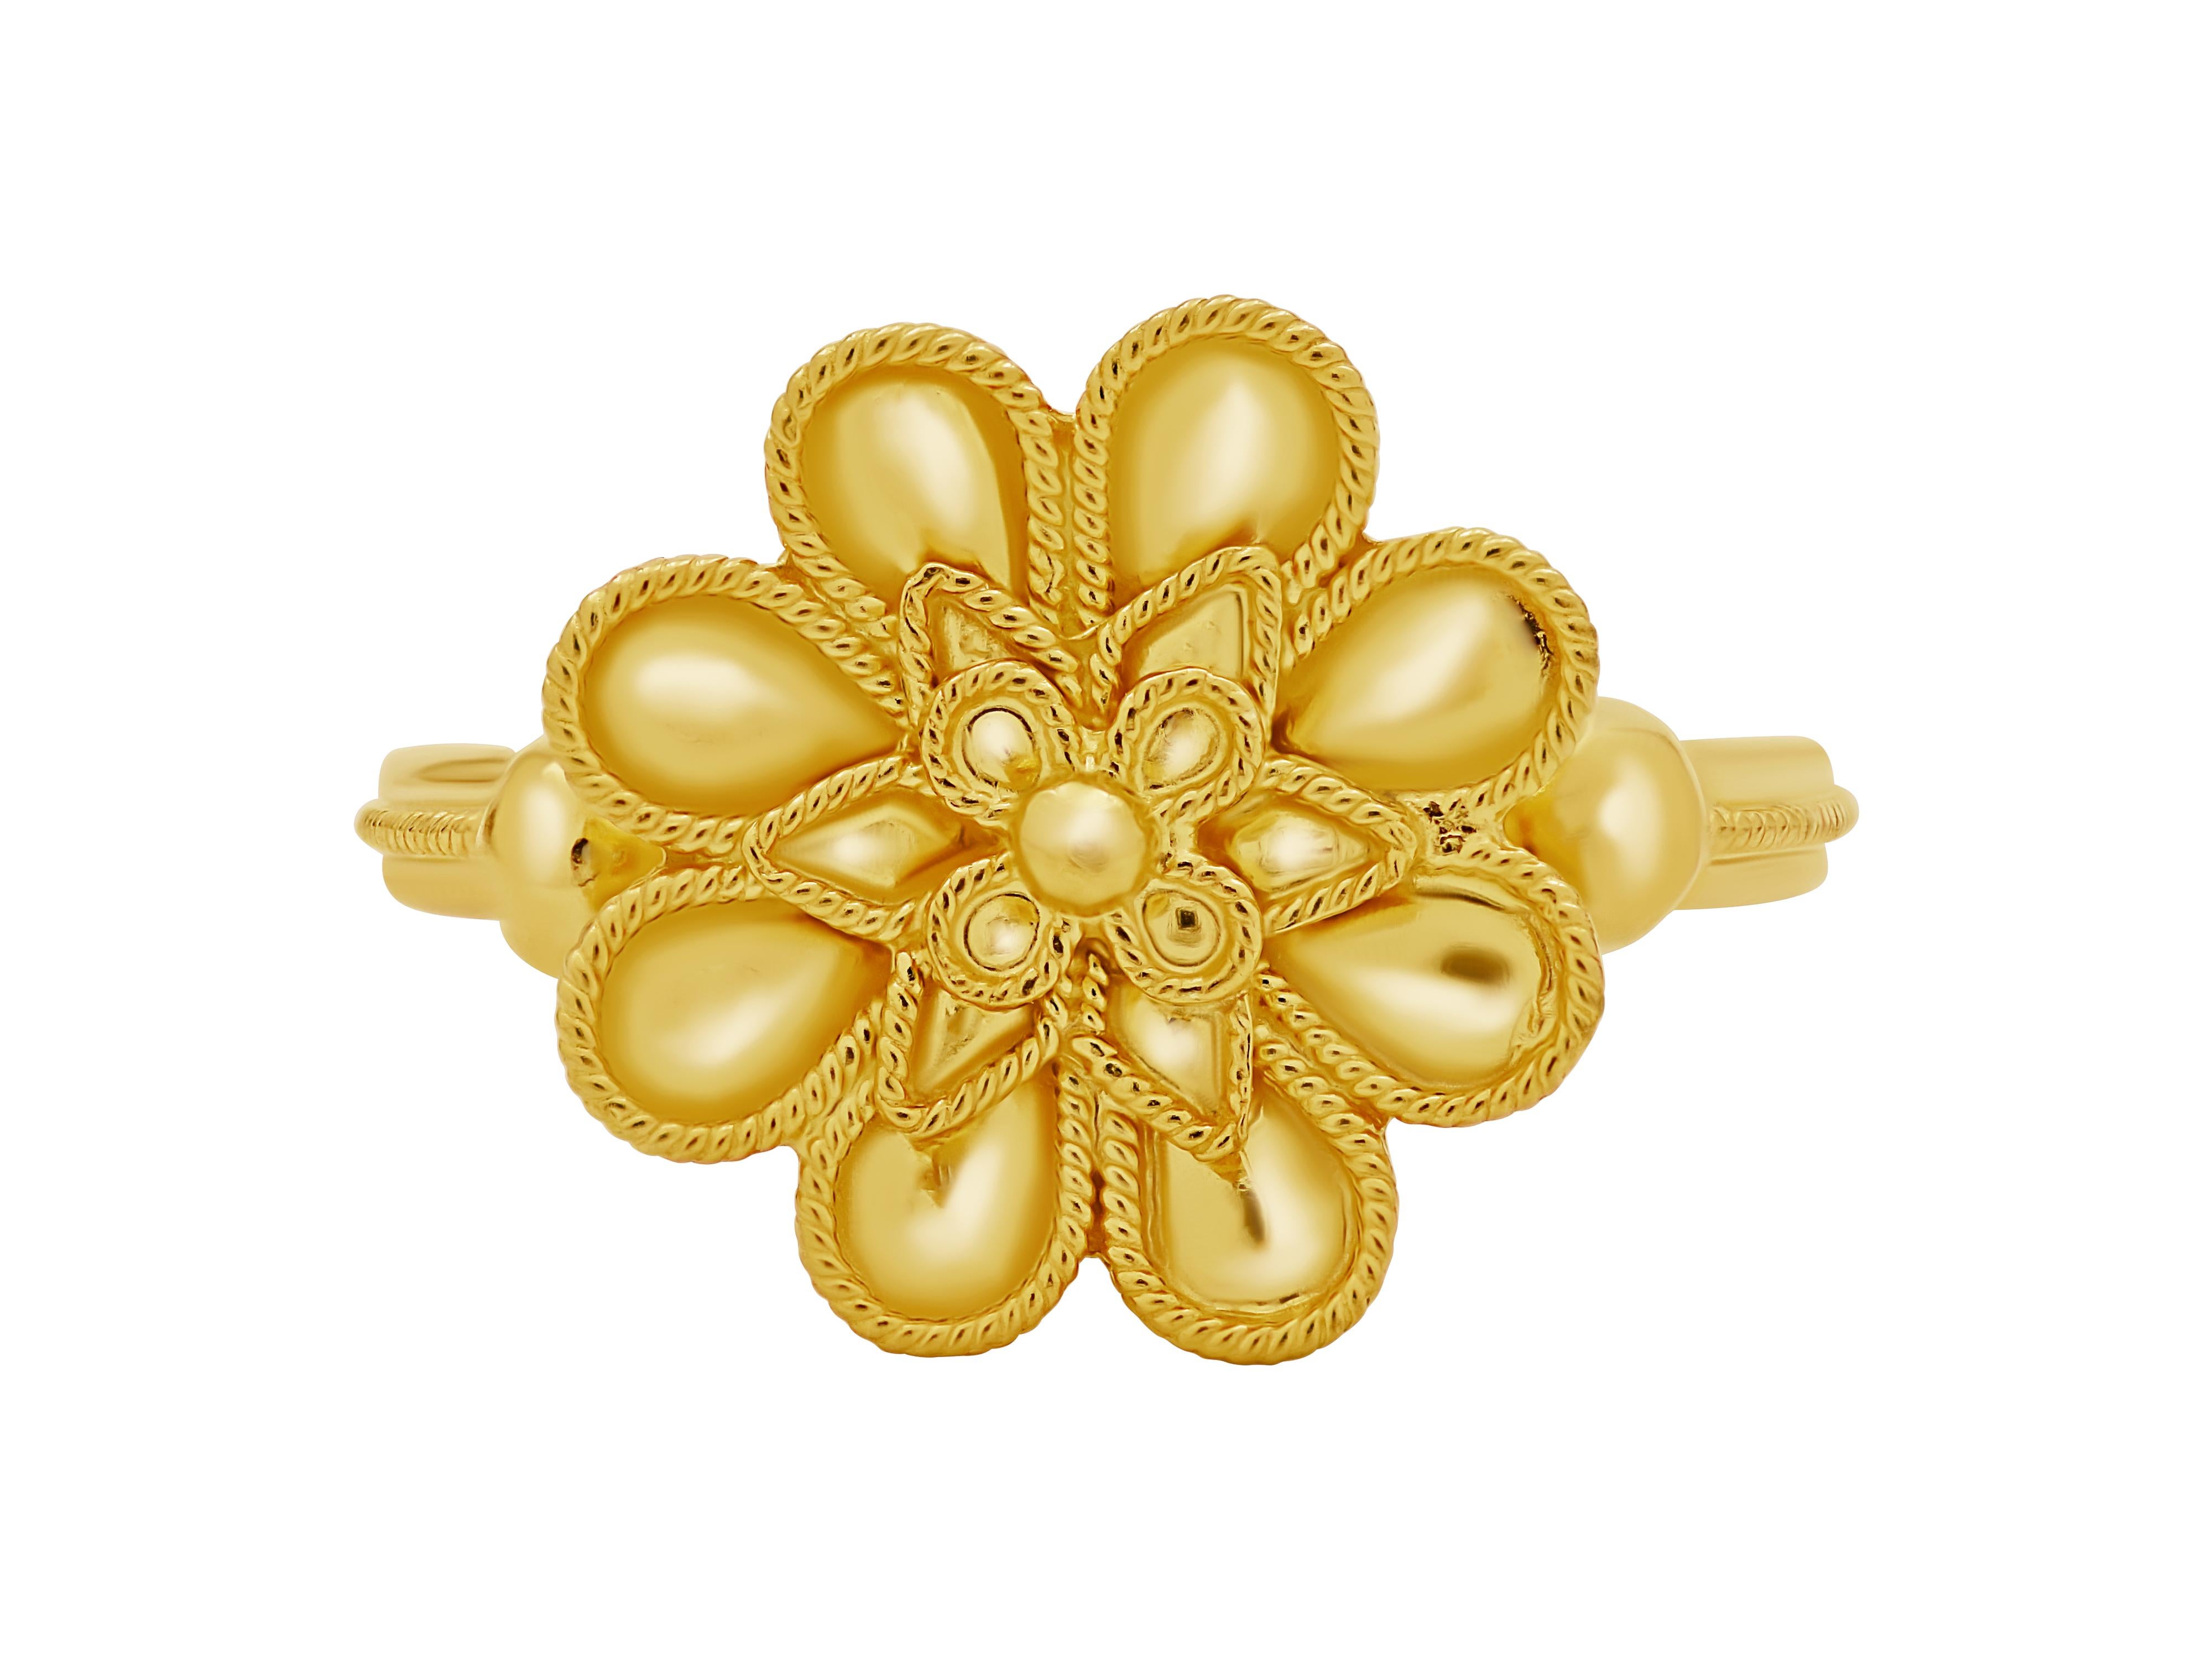 The rosette ring in its triple version set in 18k yellow gold. A museum legend that it’s been so presented in our history here in triple leaf with filigrees. Thin band for comfort wear also with filigree decoration.